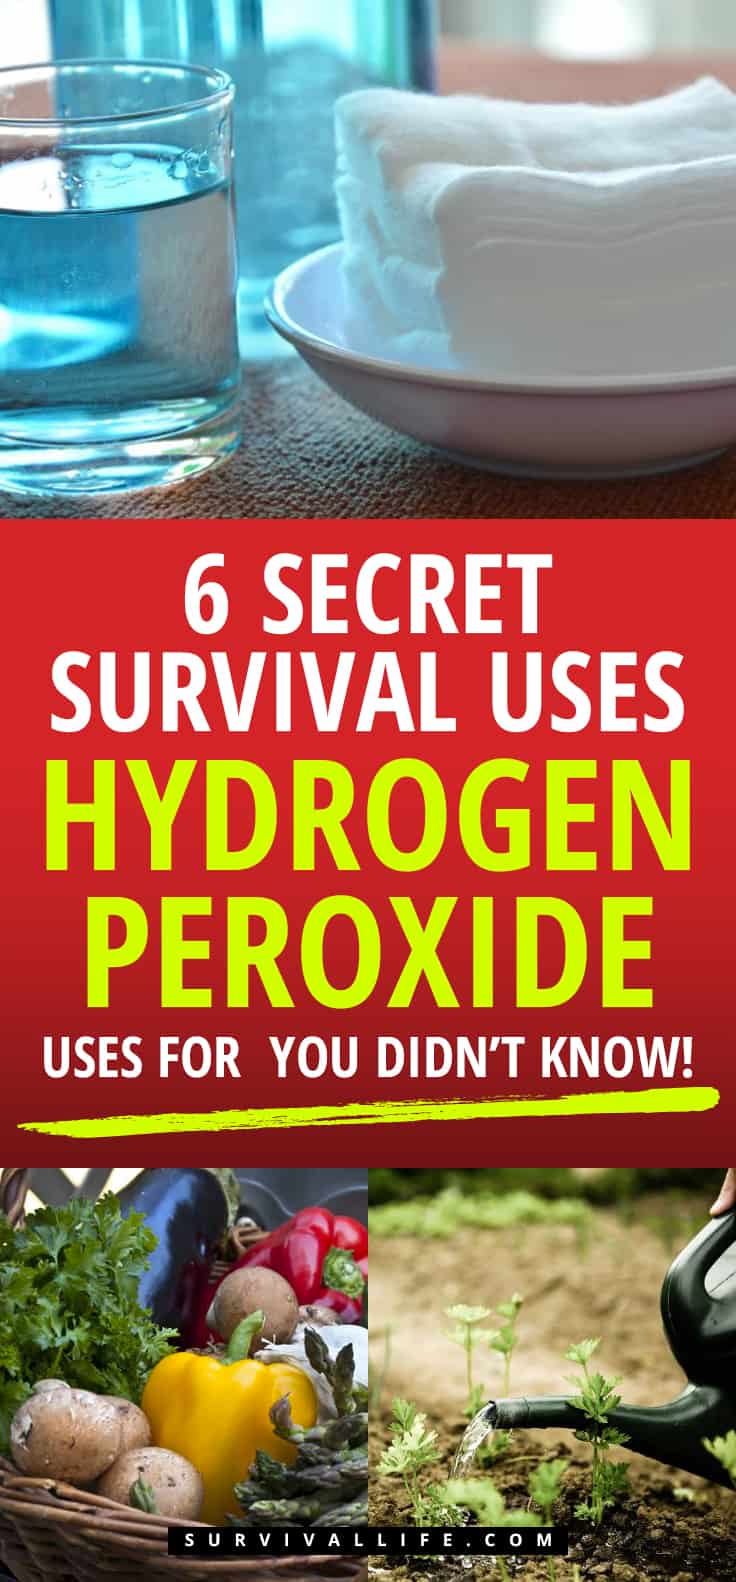 Secret Survival Uses For Hydrogen Peroxide You Didn't Know! | https://survivallife.com/hydrogen-peroxide-survival-uses/